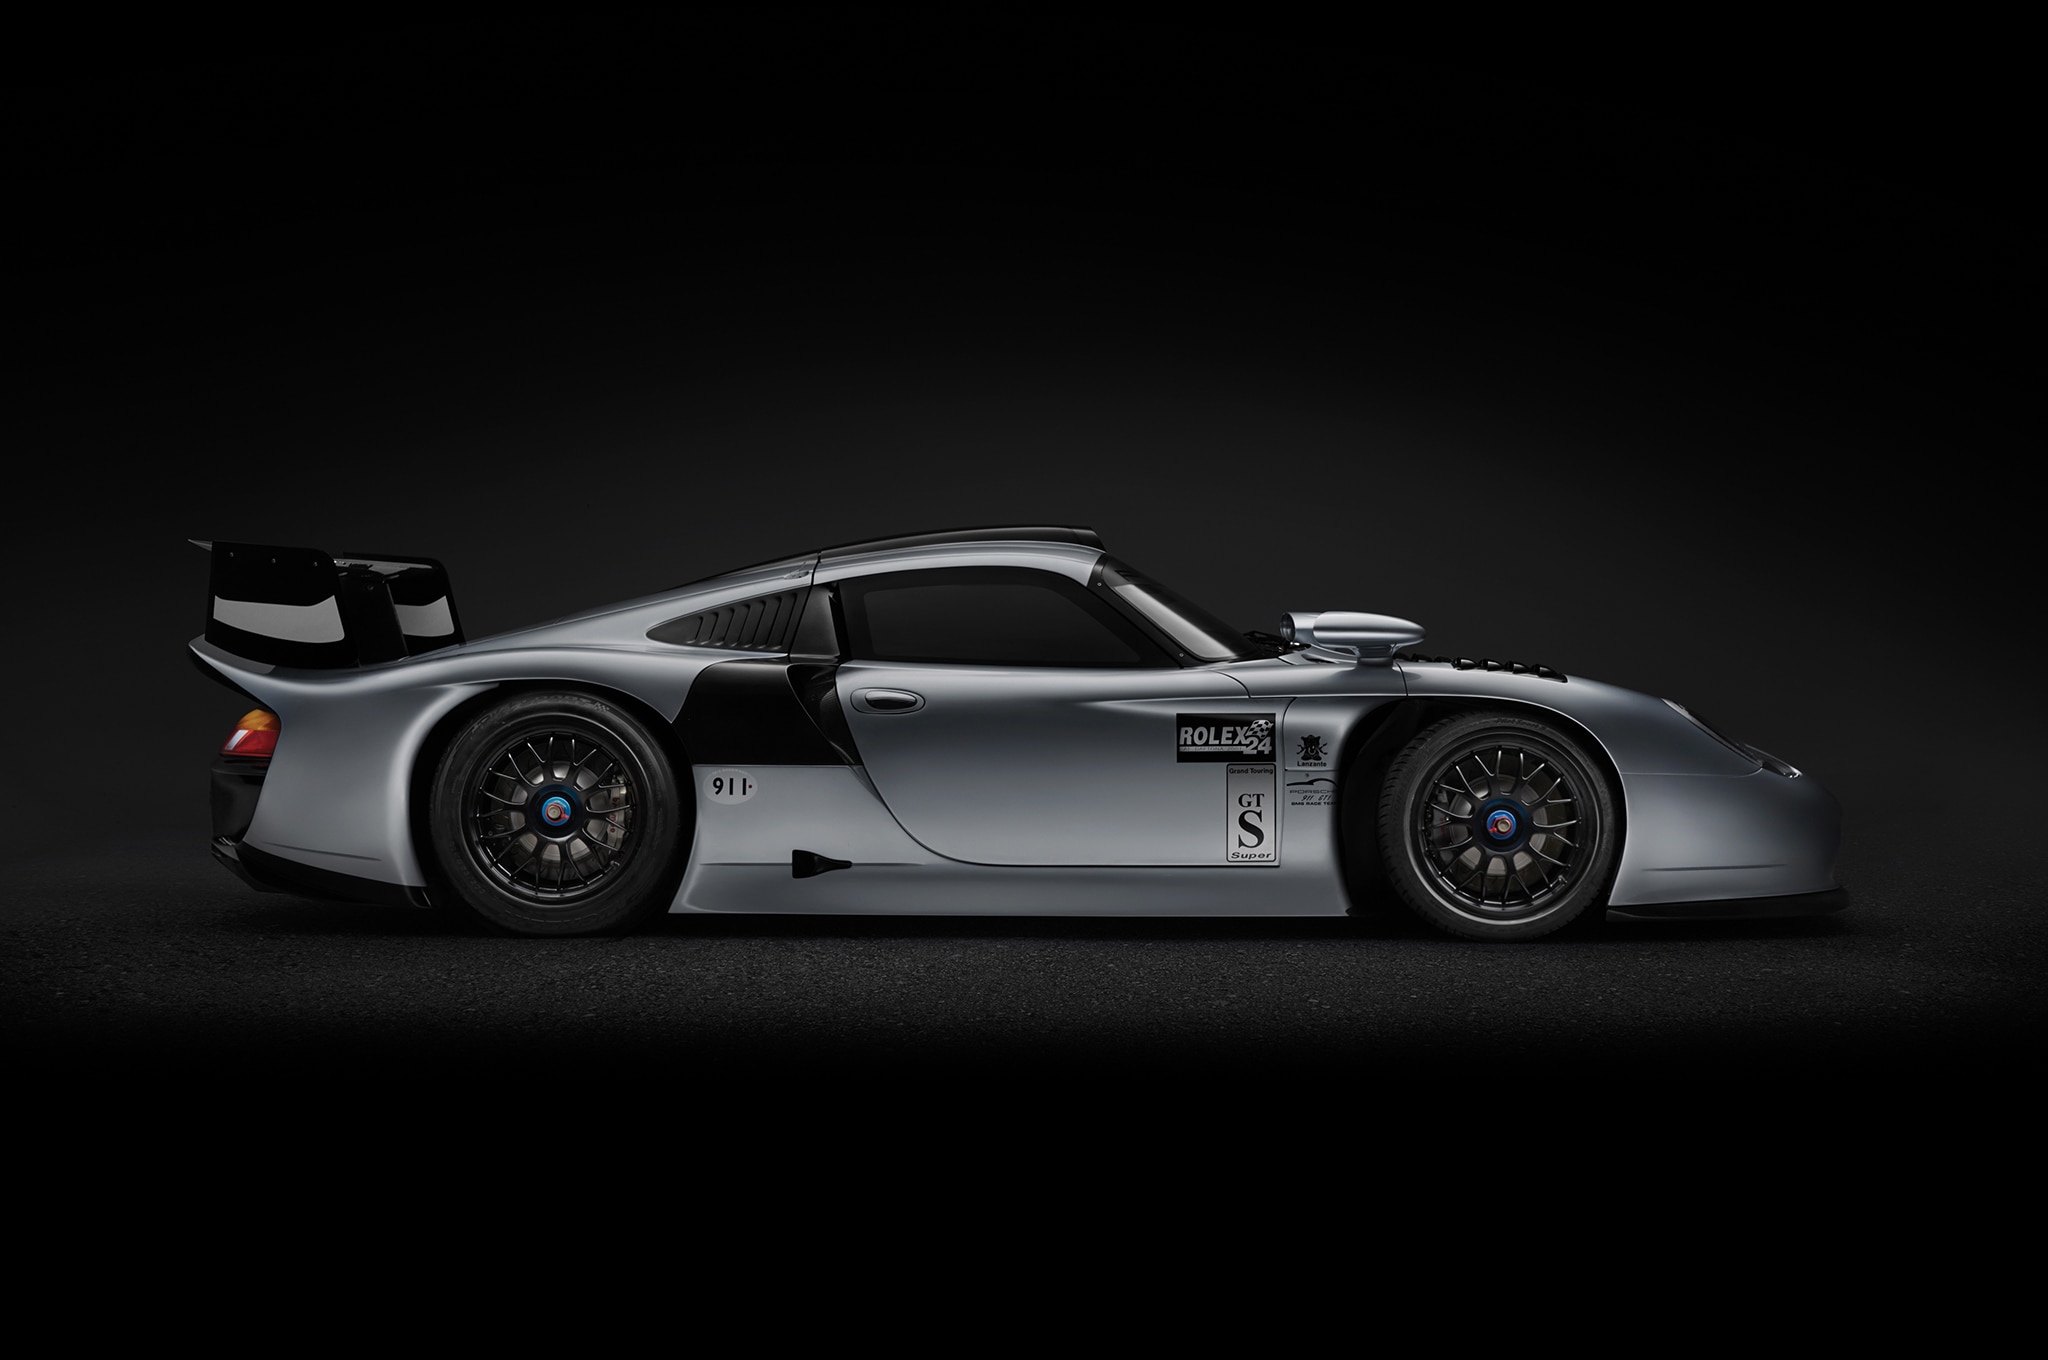 You Can Buy The Only Street Legal 1997 Porsche 911 GT1 Evo